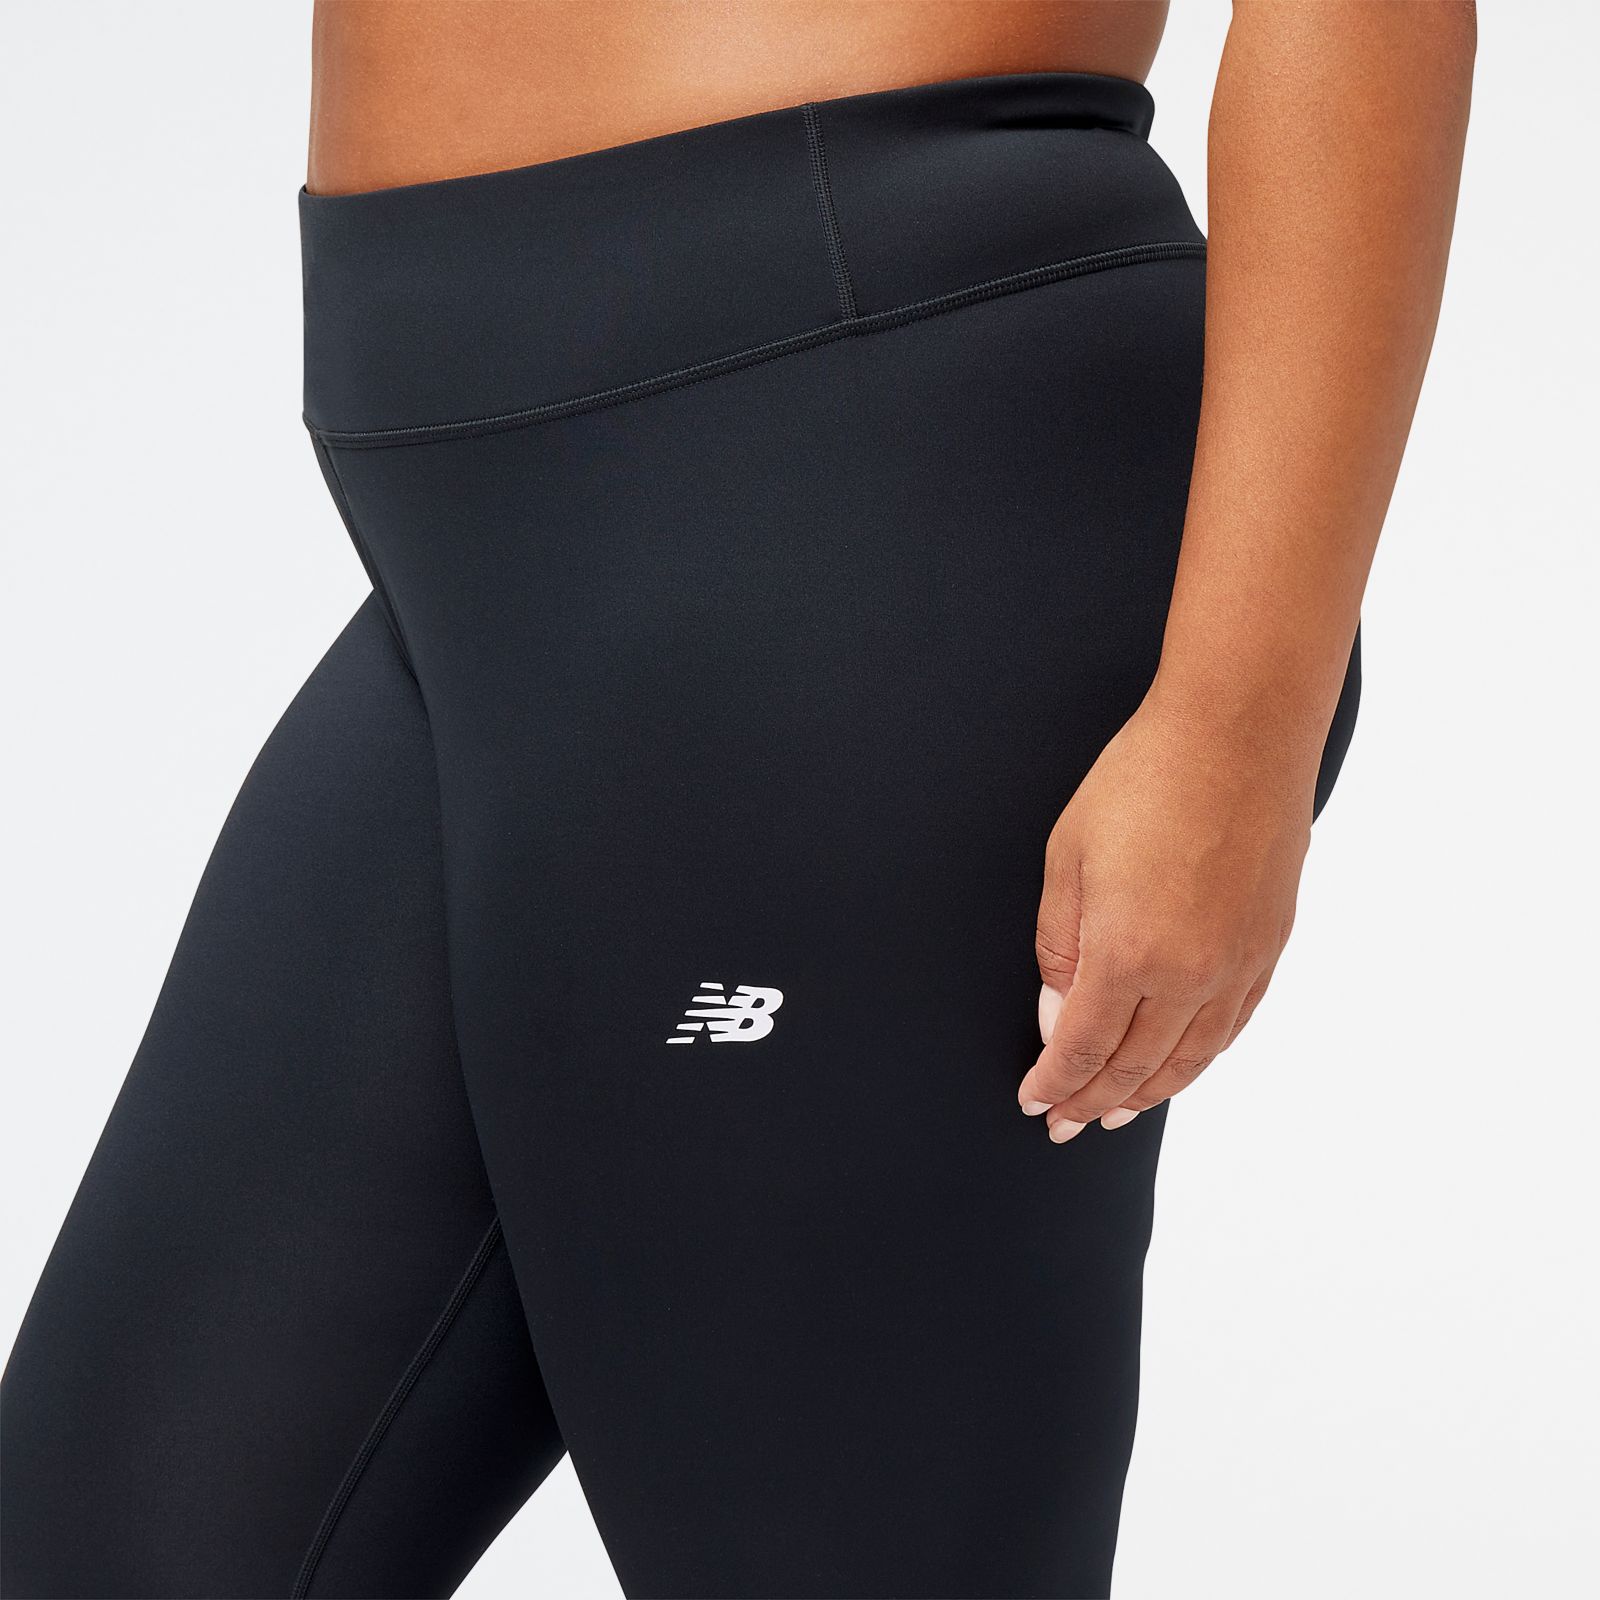 New Balance Running Tights With Pockets - Just Right